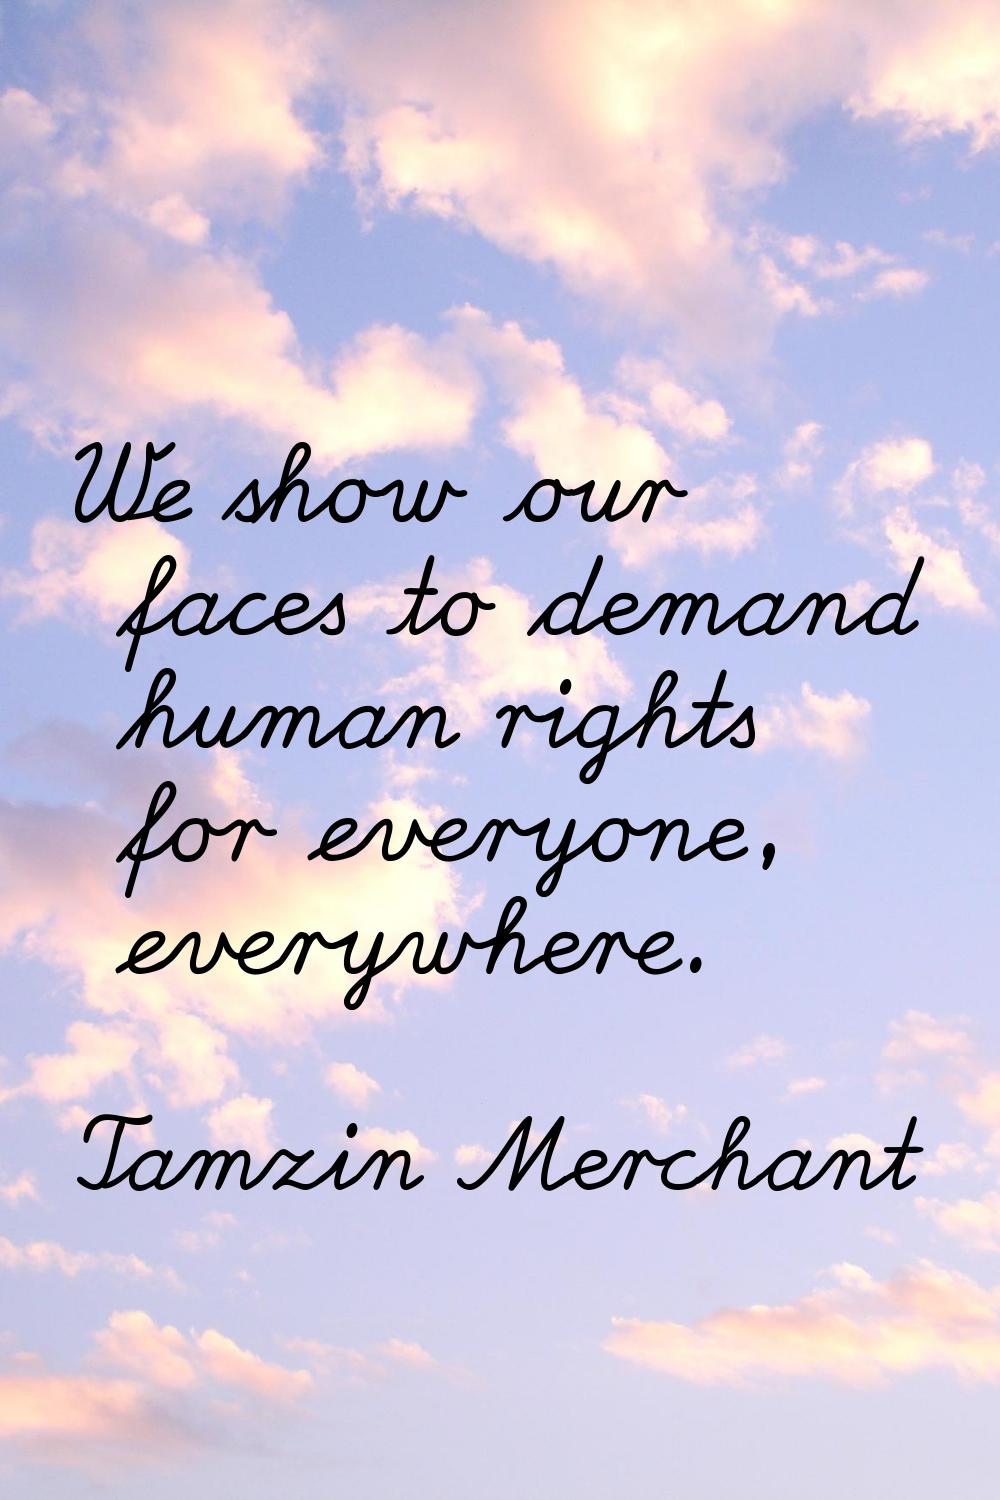 We show our faces to demand human rights for everyone, everywhere.